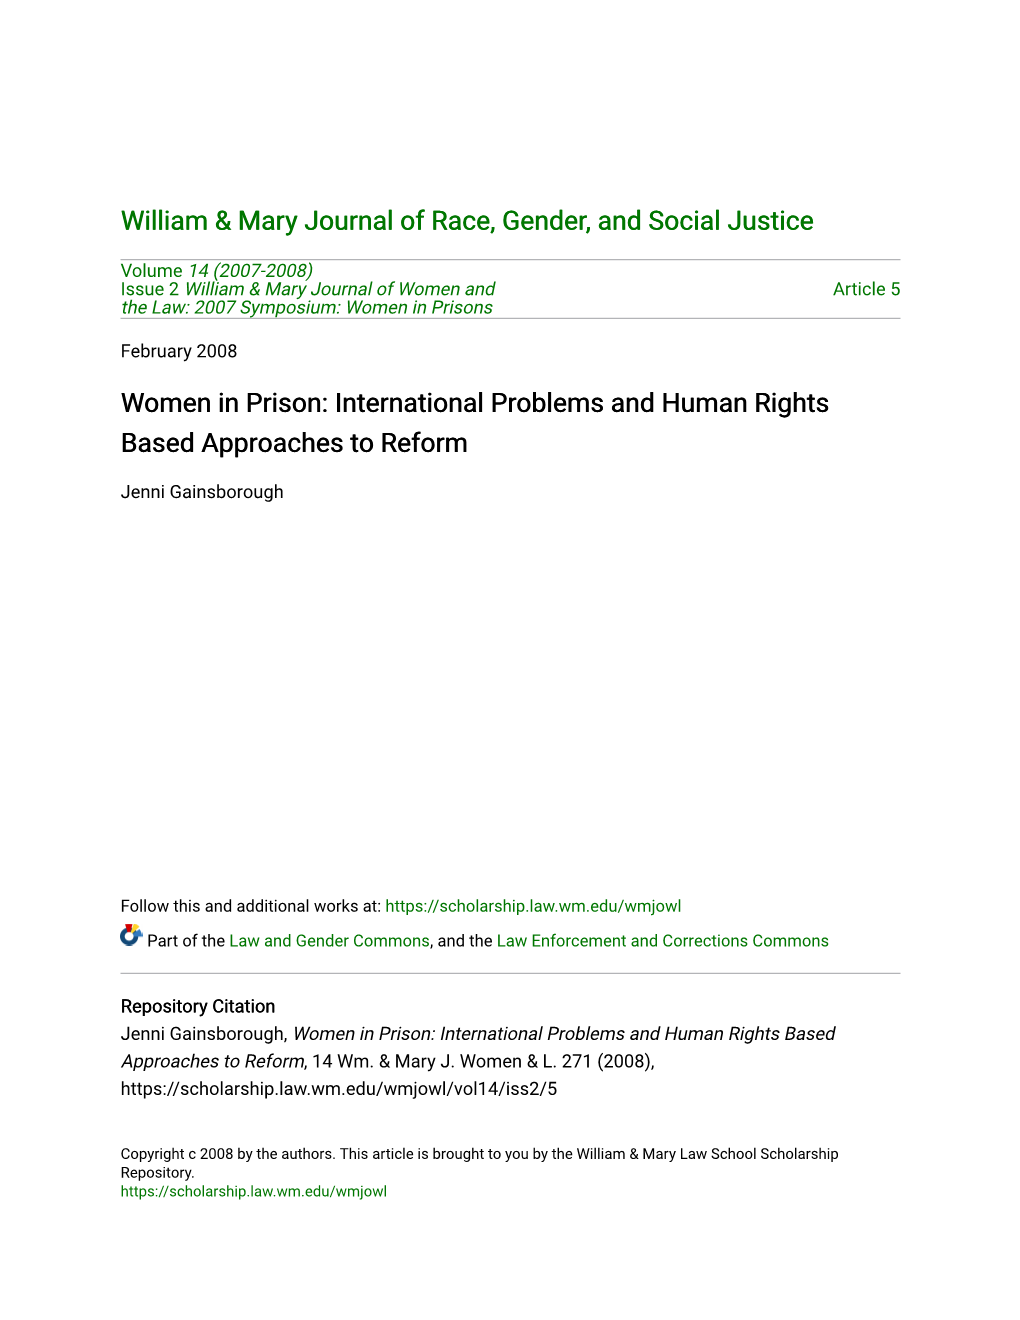 Women in Prison: International Problems and Human Rights Based Approaches to Reform